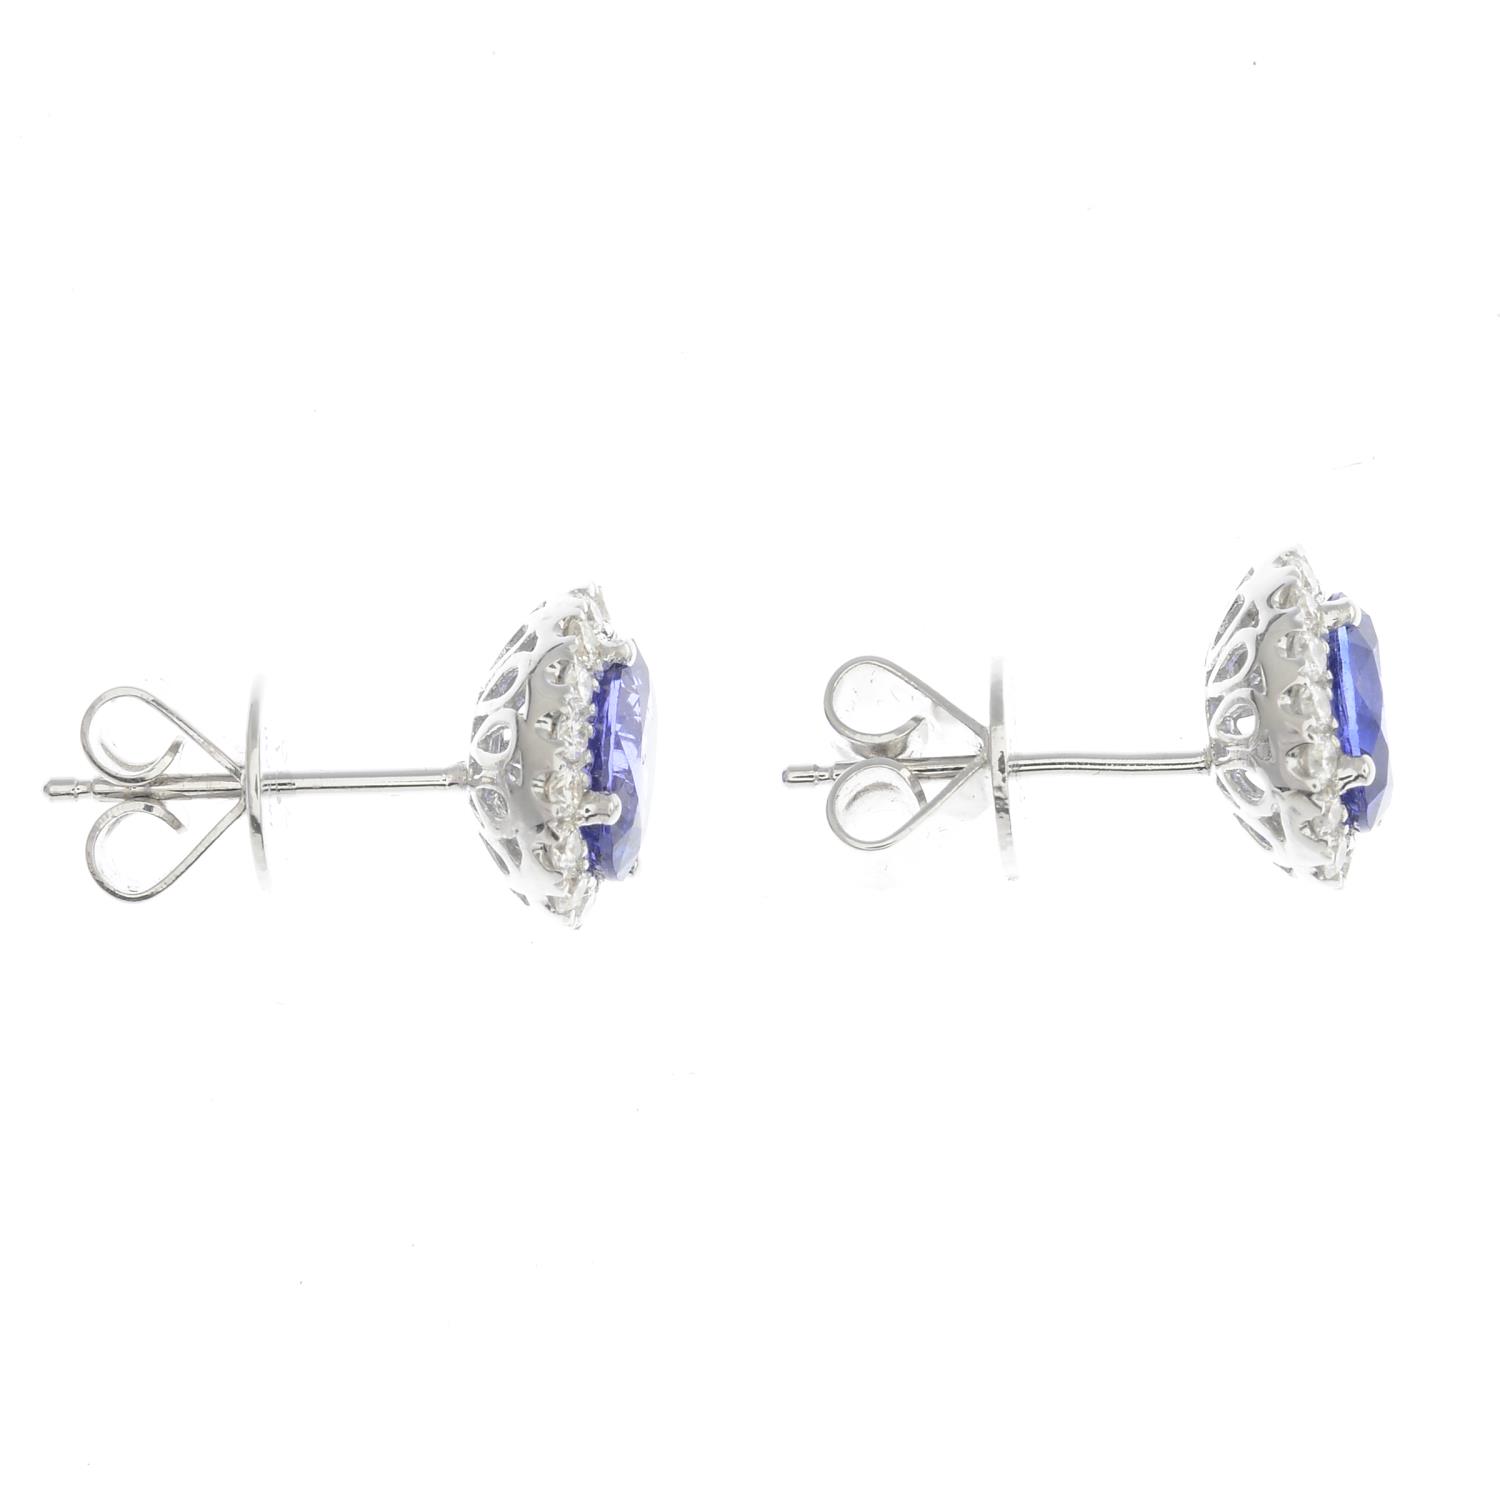 A pair of sapphire and diamond earrings.Total sapphire weight 1.95cts, - Image 2 of 2